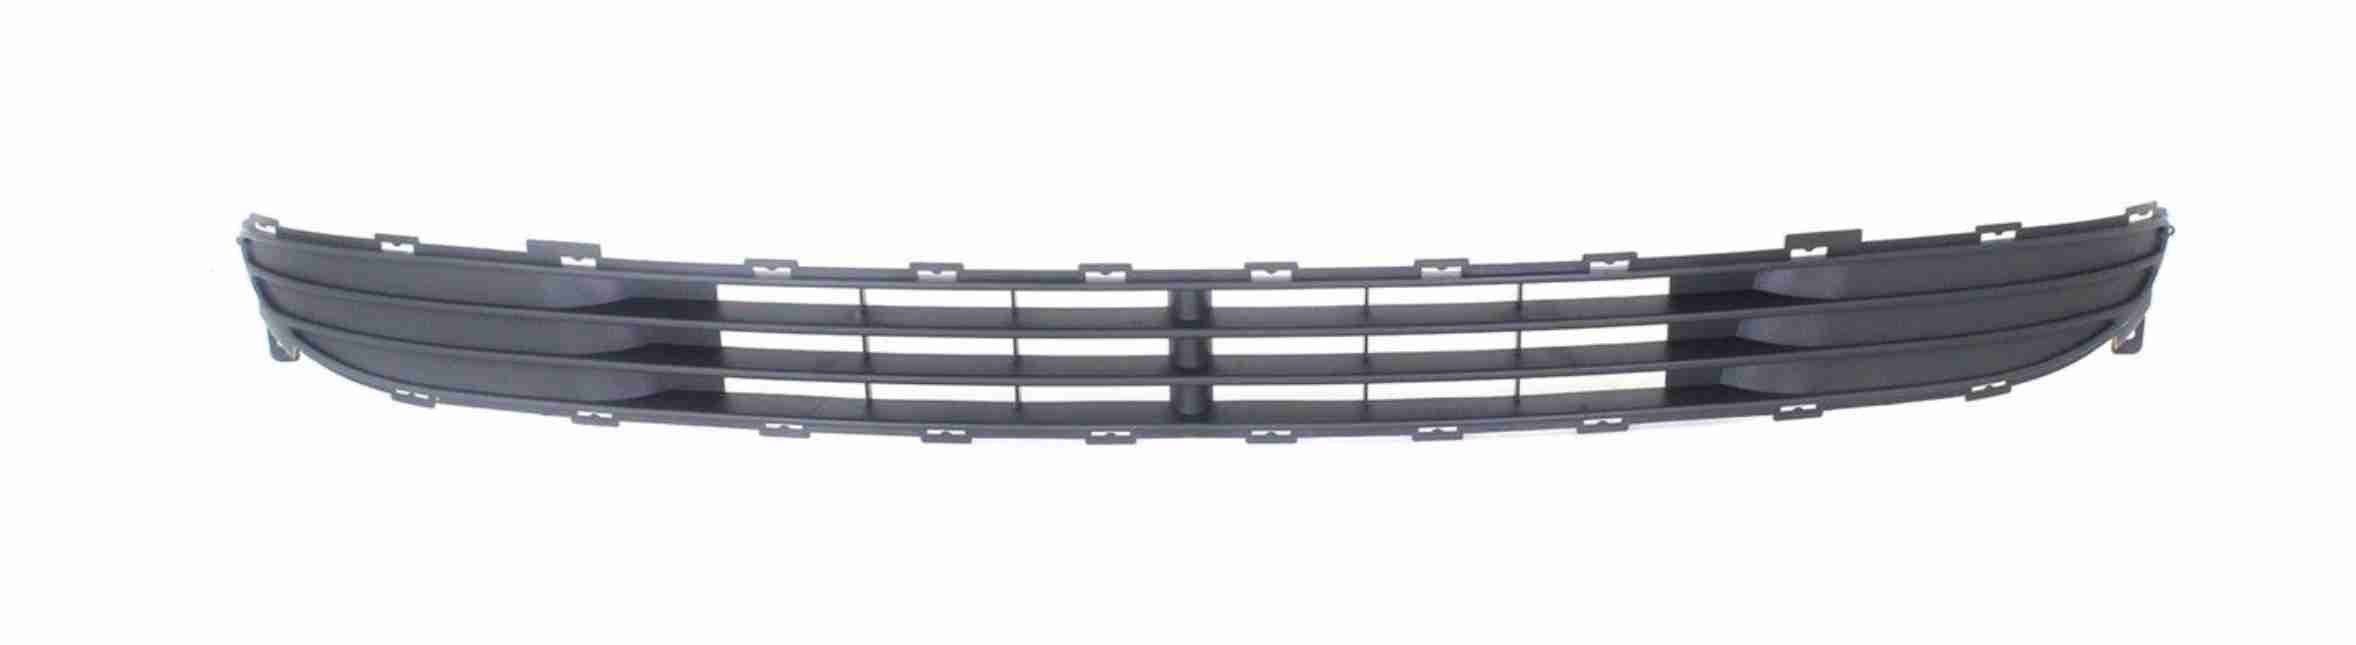 GRI502373 - 2005997 - RIO 2005-2009 FRONT BUMPER GRILLE W/OUT FOG 